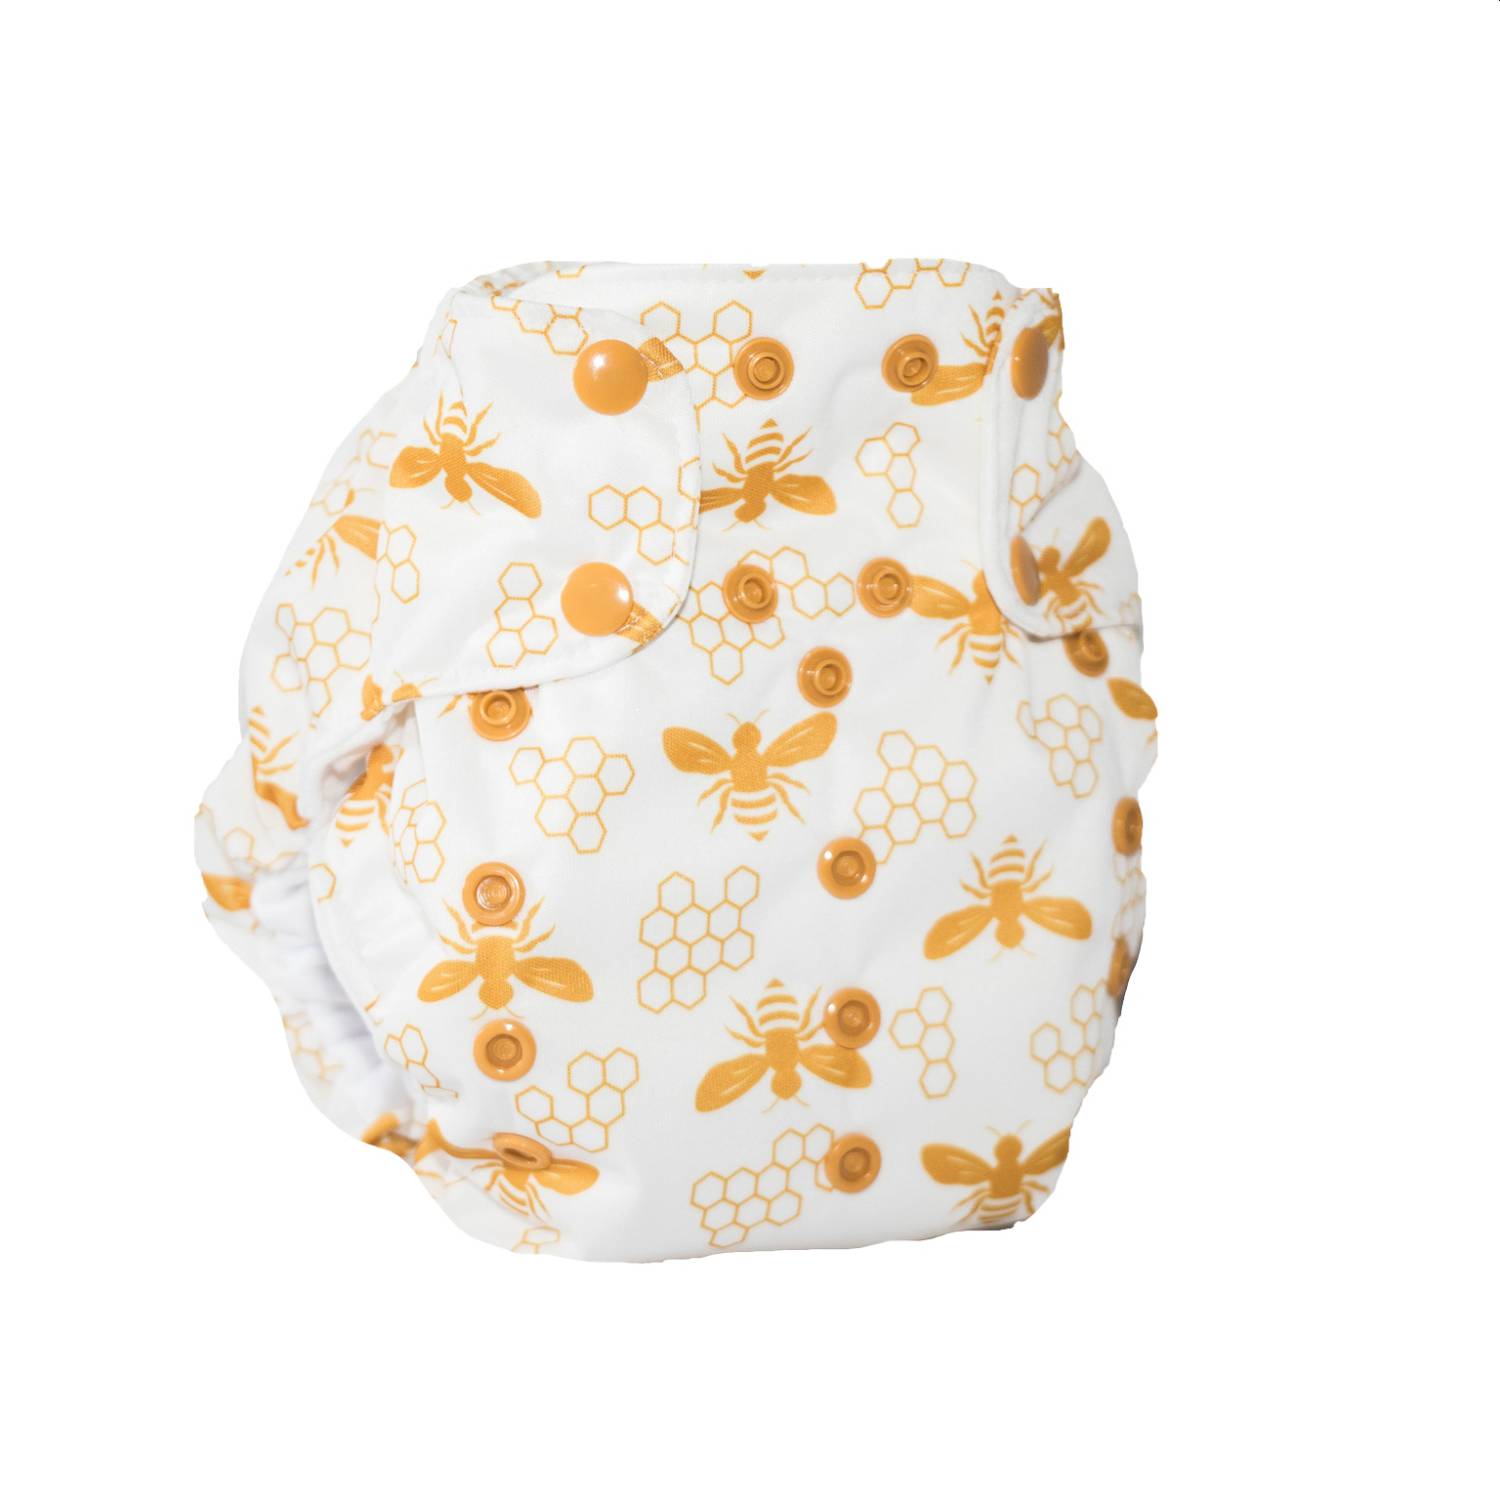 Smart Bottoms Dream Diaper 2.0 AIO One Size Pattern: Bee Yourself